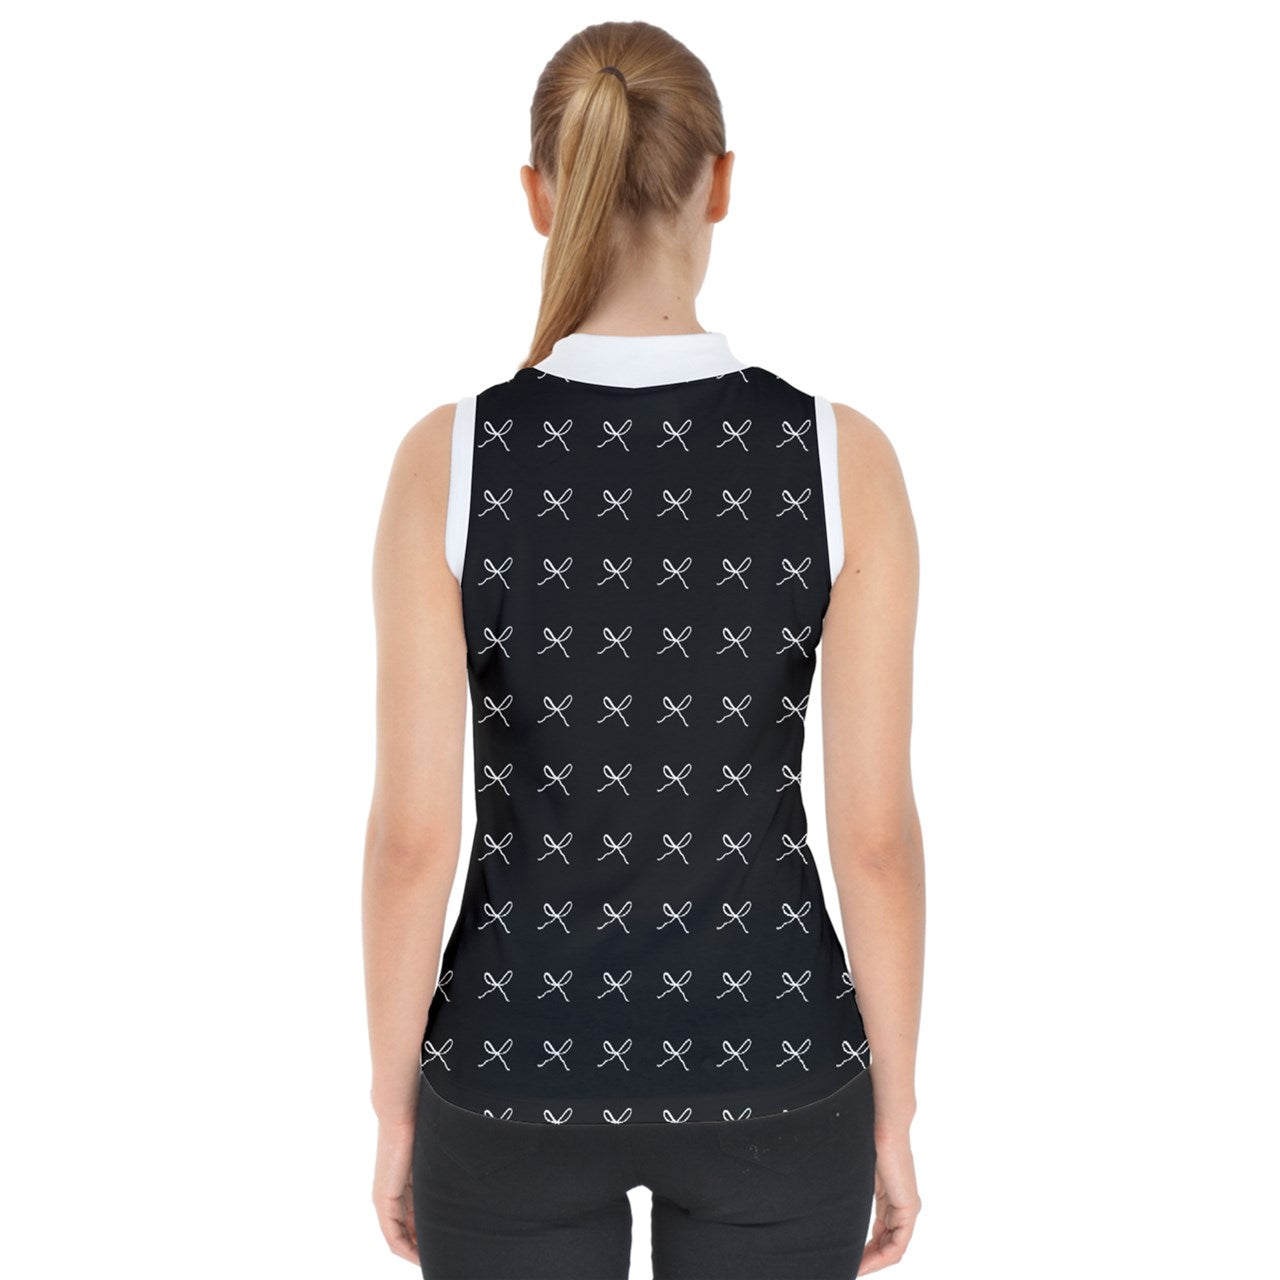 Rows of Bows dark Mock Neck Shell Top